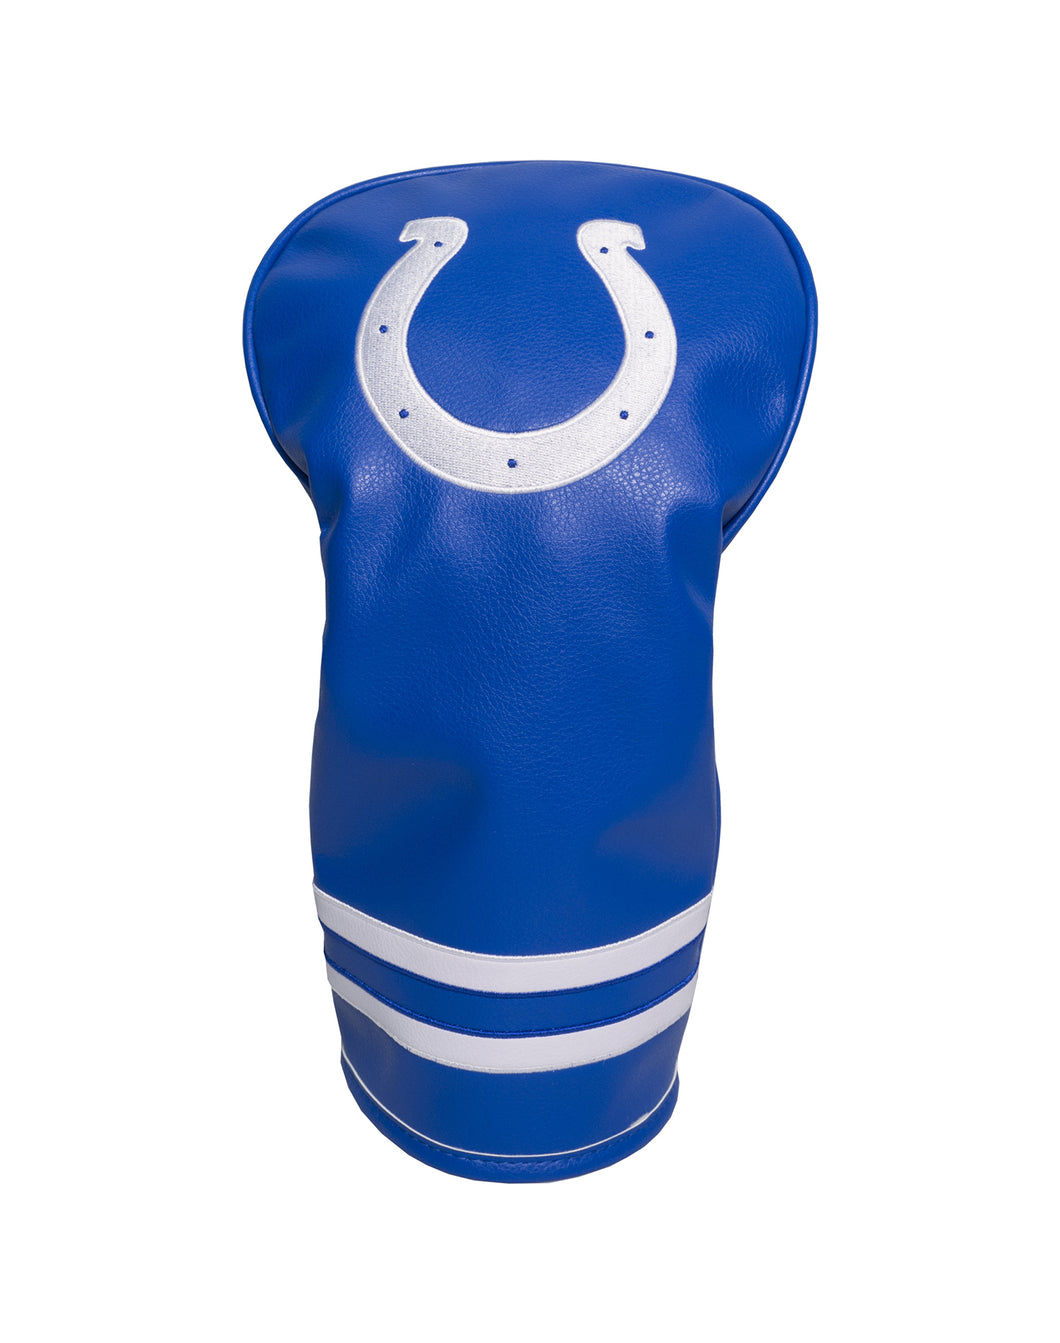 NFL Official Vintage Golf Fairway Wood Headcover. Indianapolis Colts.